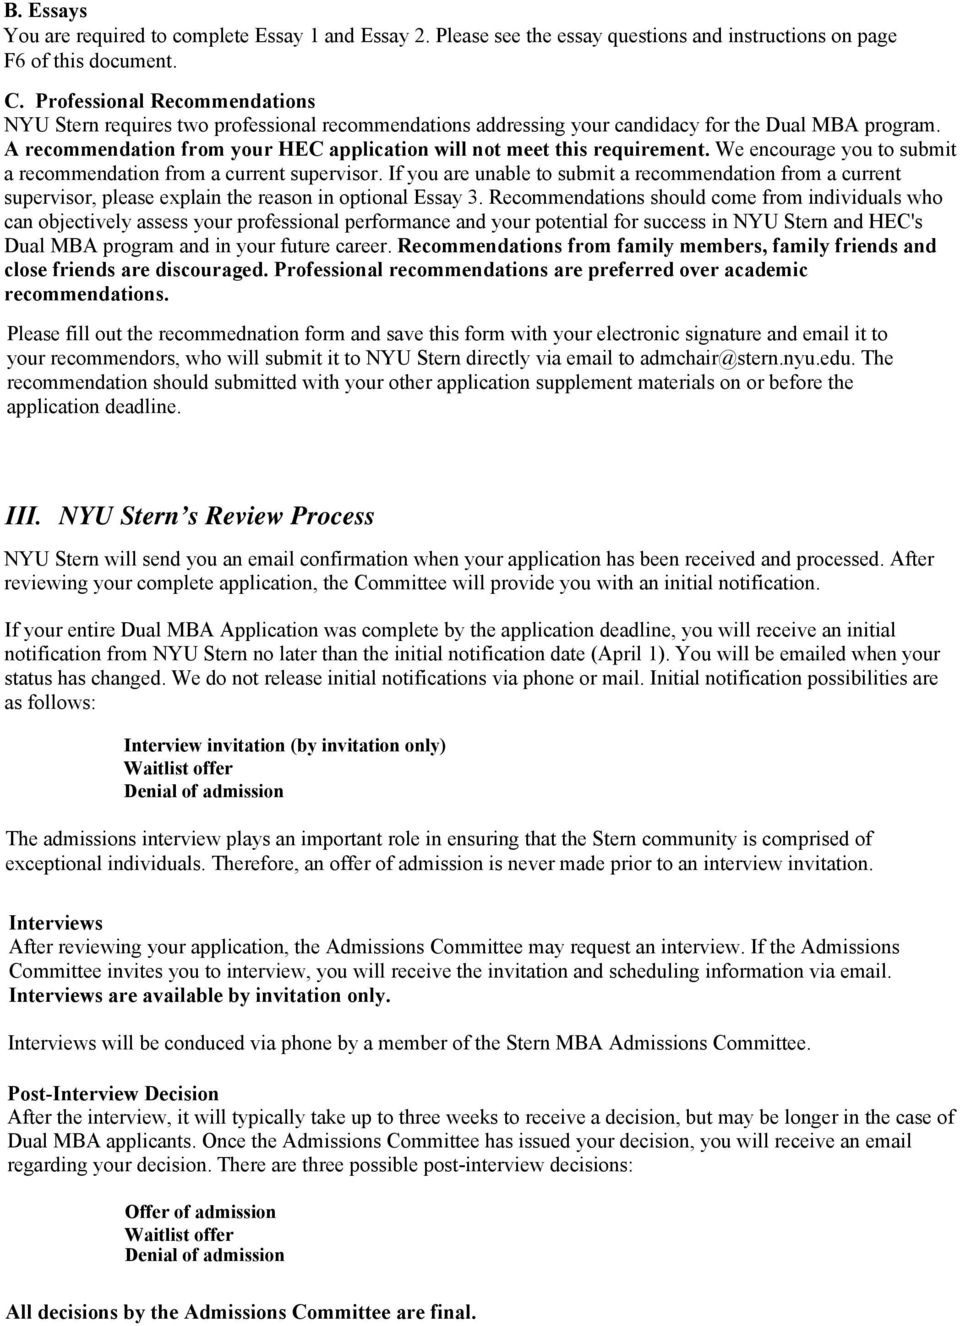 Nyu Stern Hec Dual Mba Application Pdf Free Download within measurements 960 X 1326